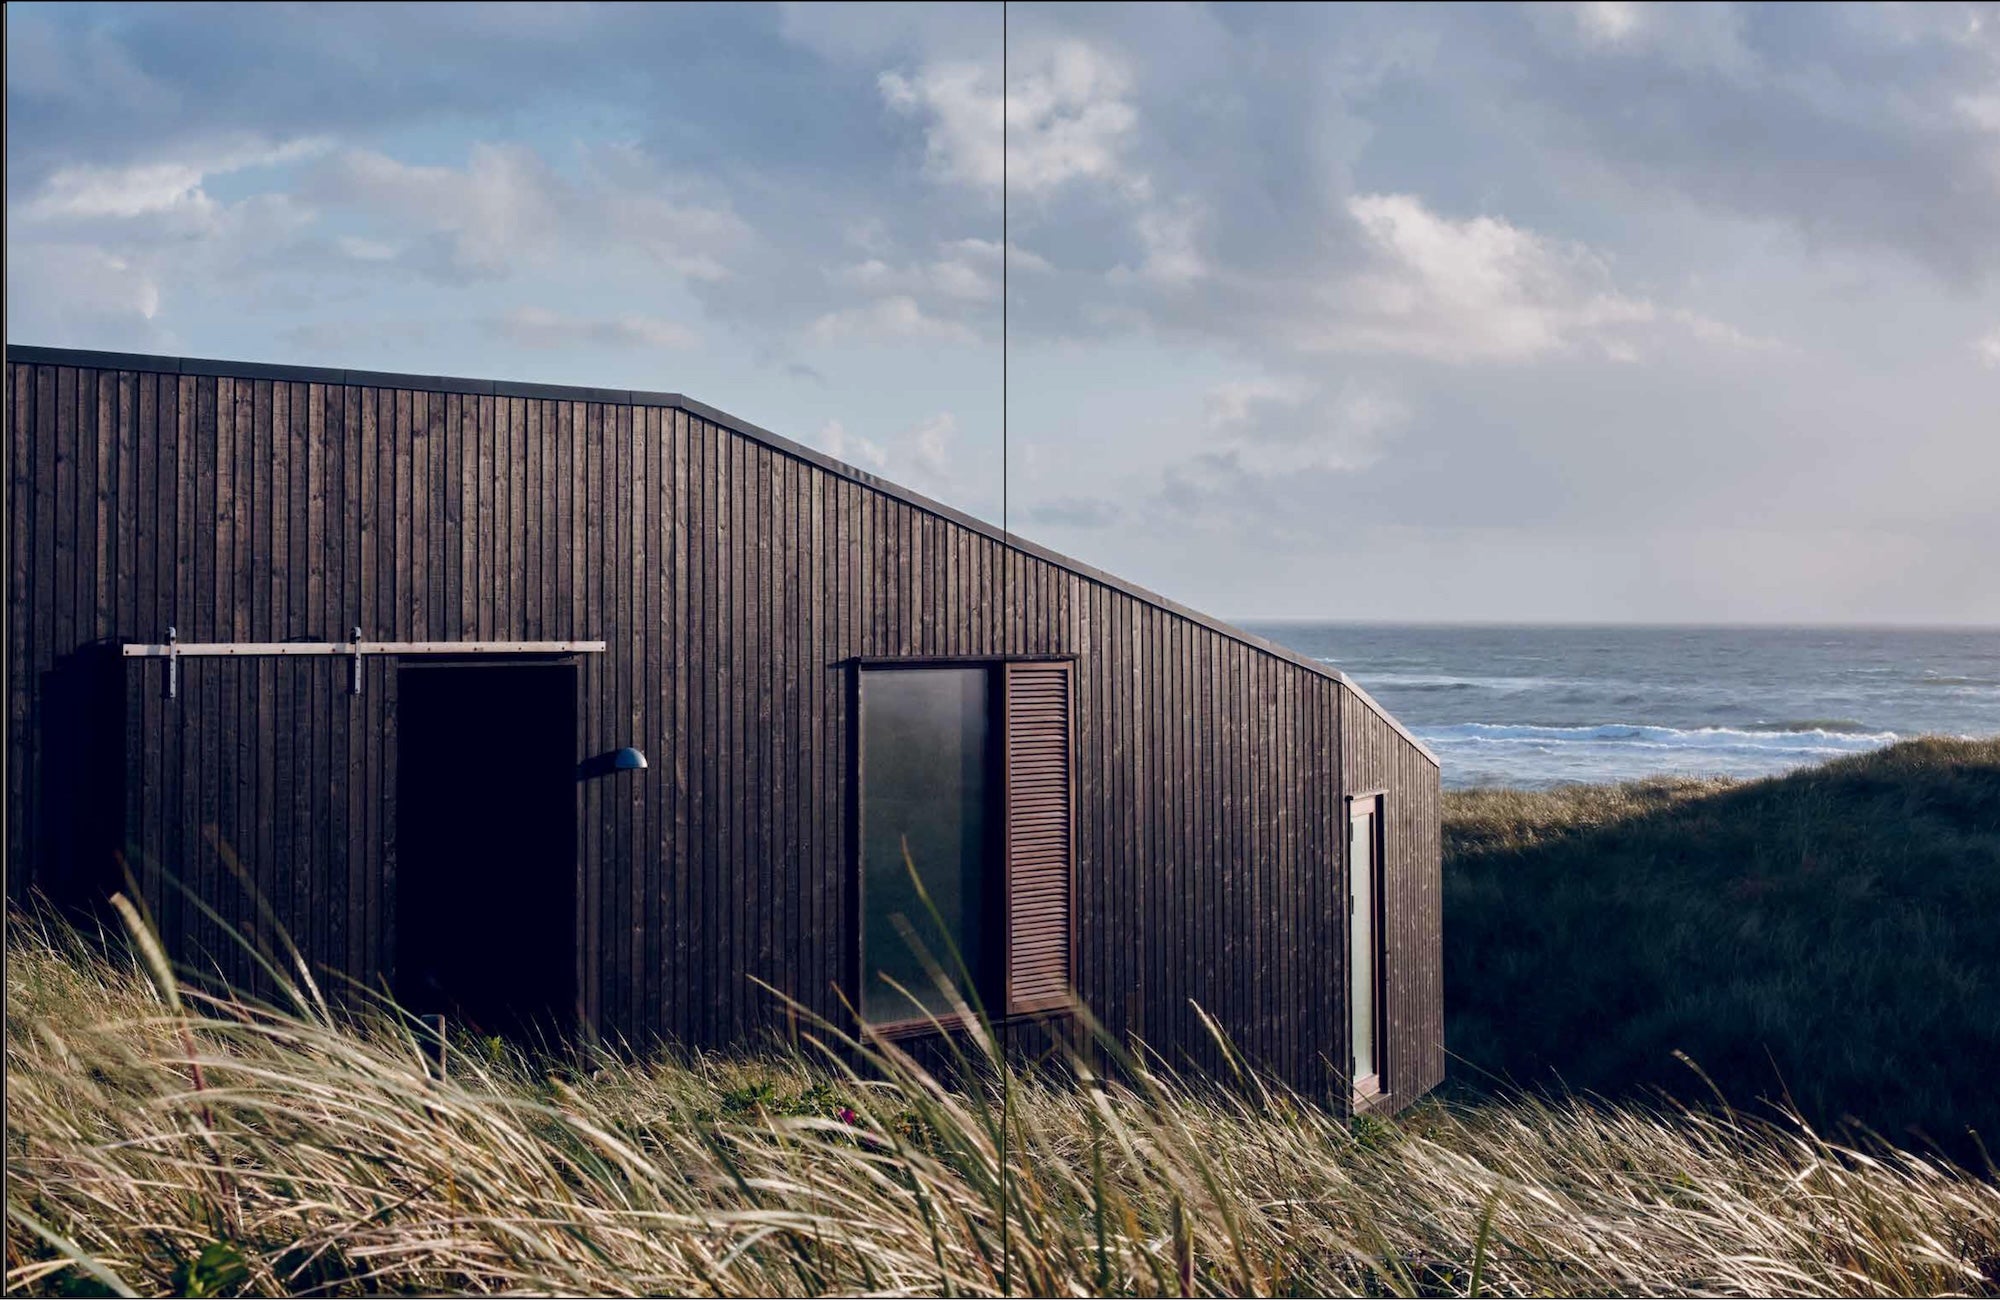 Earth, Sky & Water - Houses in the Nordic Style